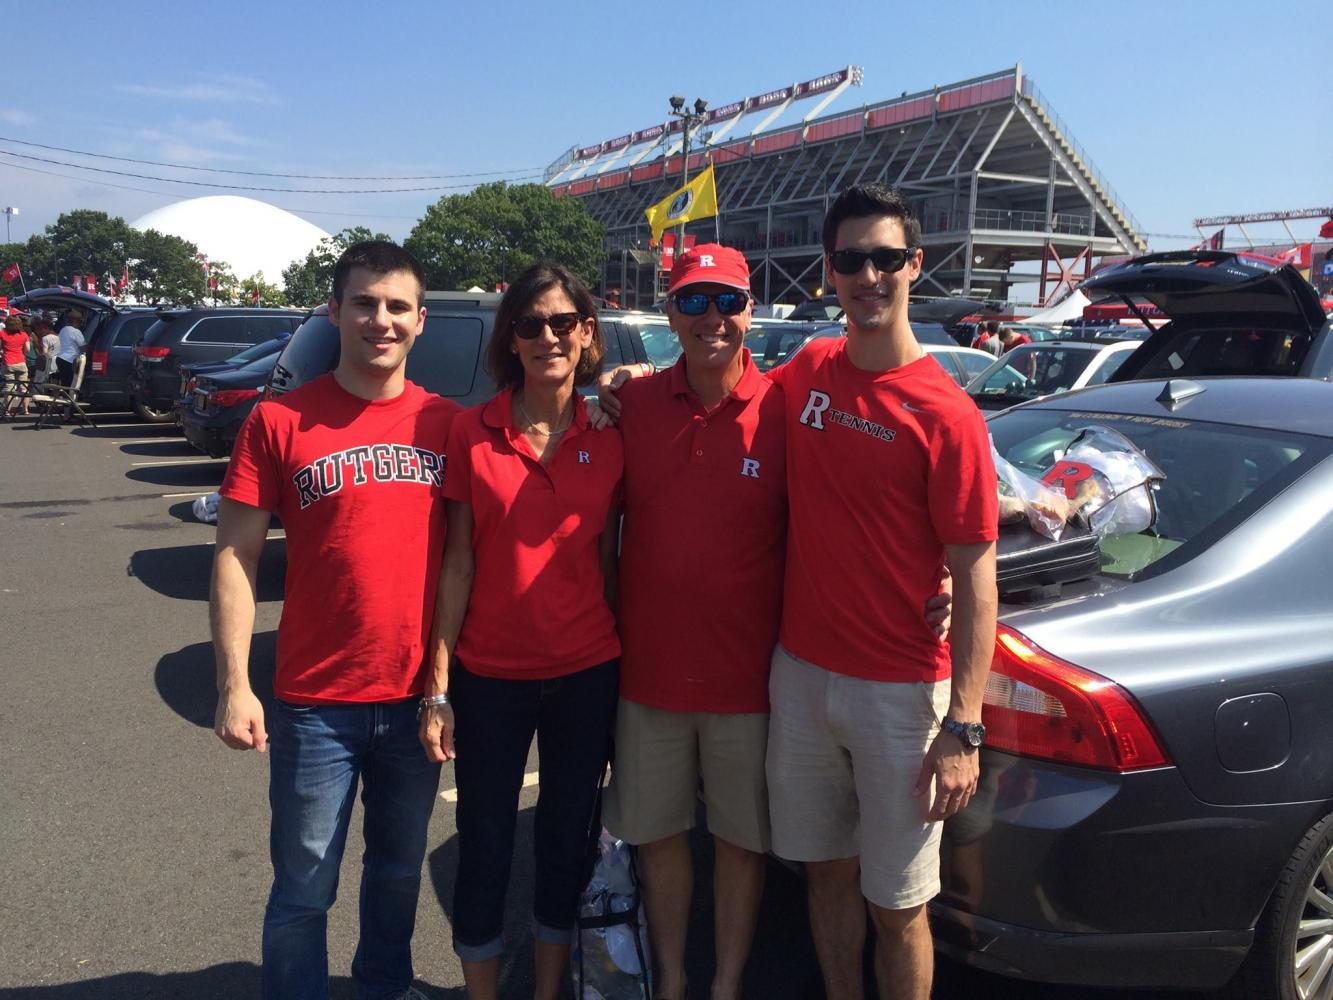 Brett, Judith, Scott, and Scott Sr. pose for a photograph at a Rutgers football game. The photo was taken a few years before Scotts mother passed away from cancer, sparking a journey -- both inner and outer -- that would change his future. 